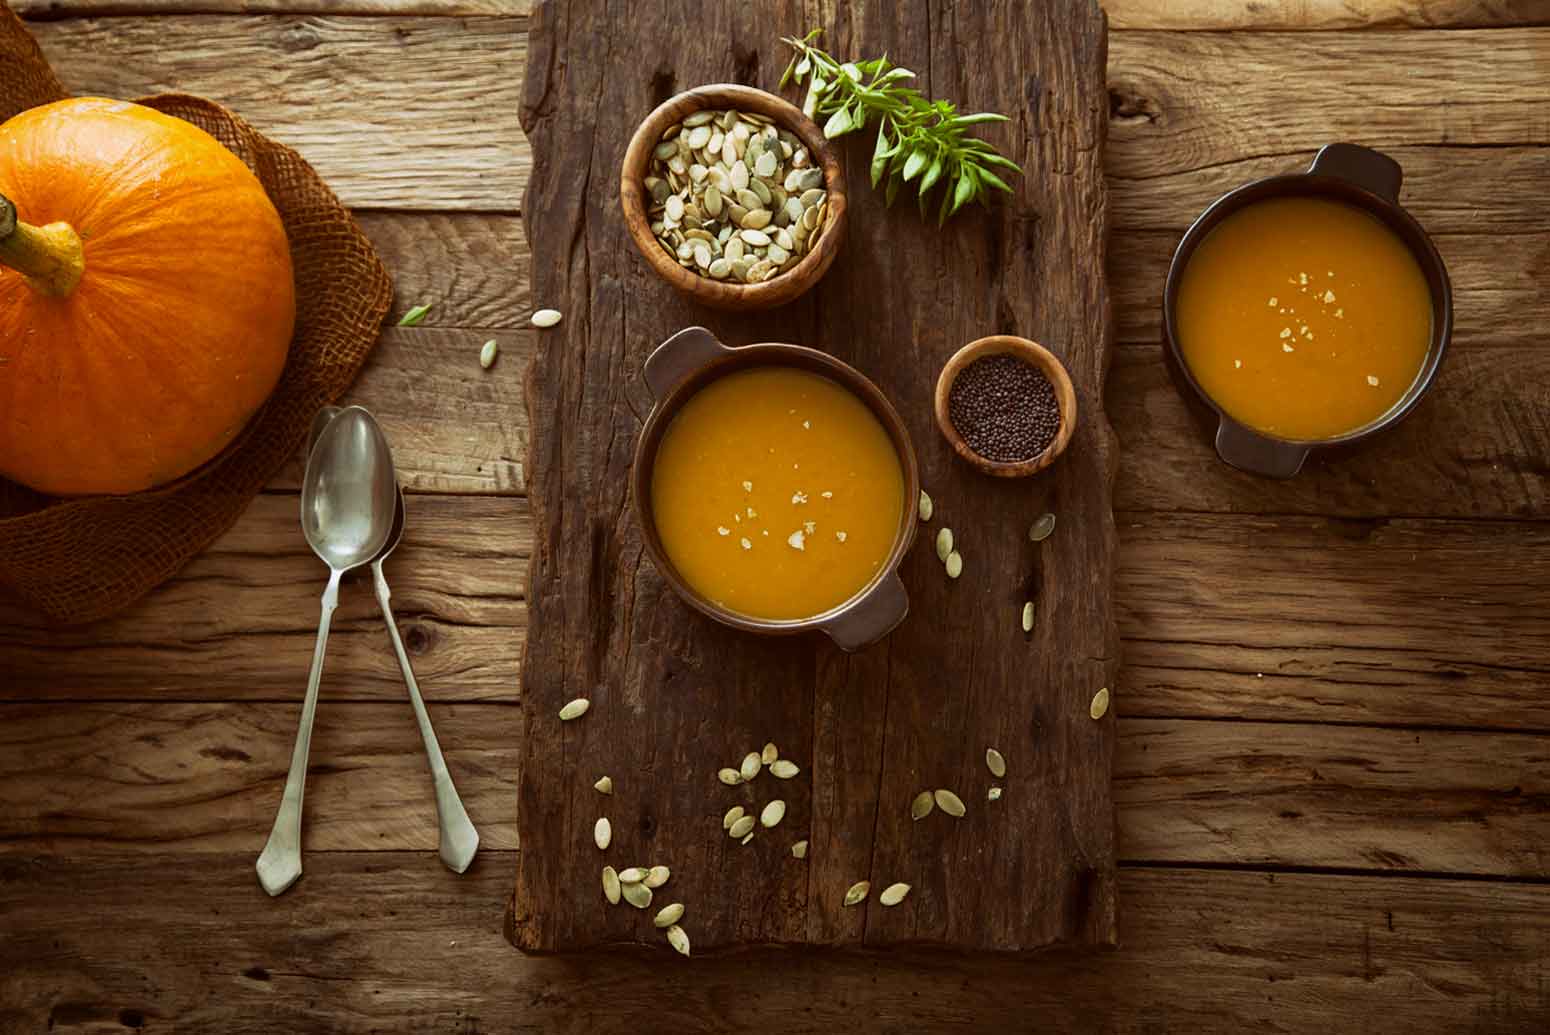 10 of the Best Pumpkin Recipes to Taste Fall Now